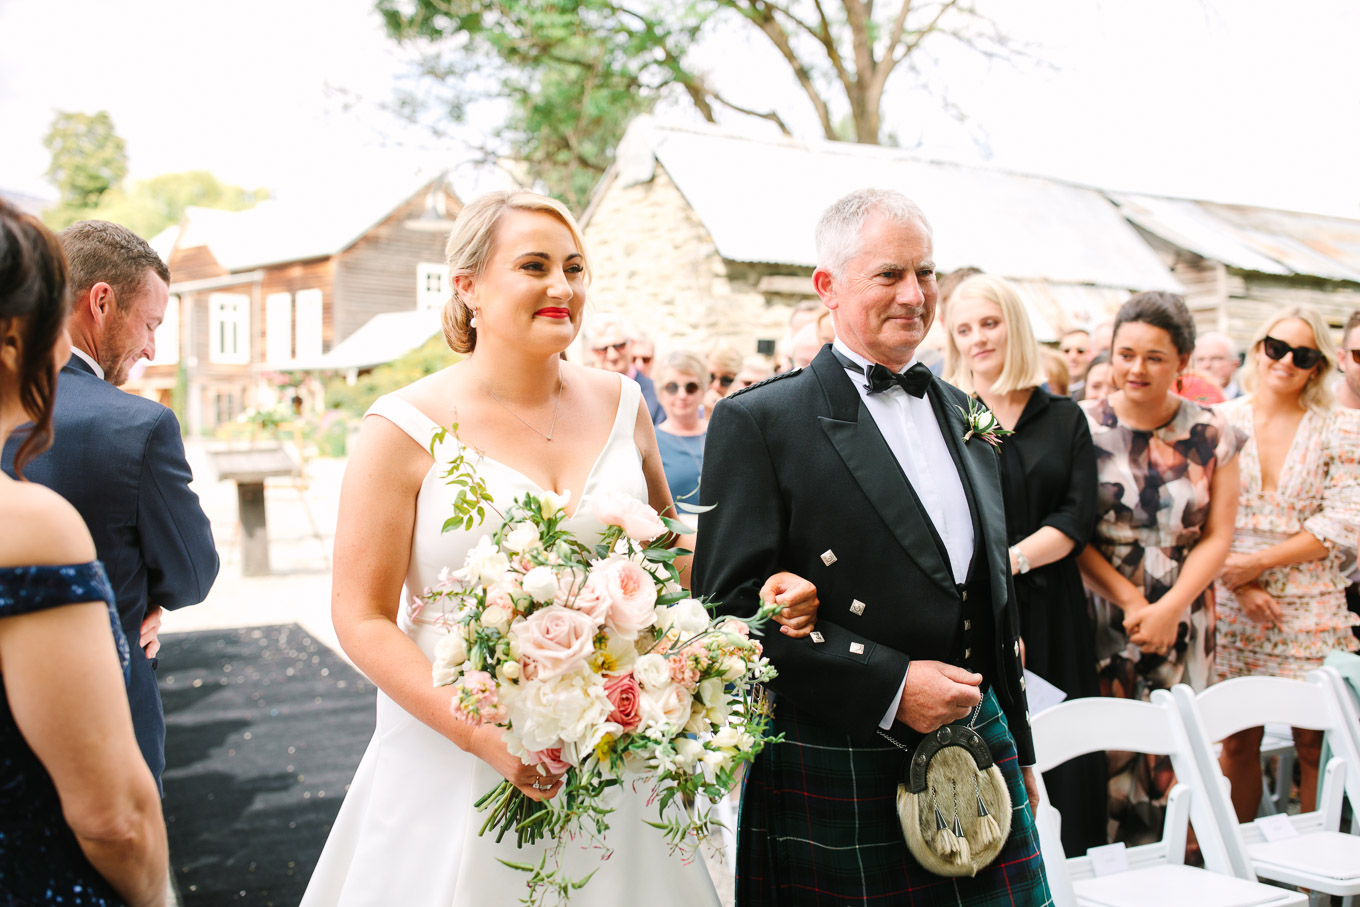 Bride and father in traditional Scottish kilt walking down the aisle together. Millbrook Resort Queenstown New Zealand wedding by Mary Costa Photography | www.marycostaweddings.com